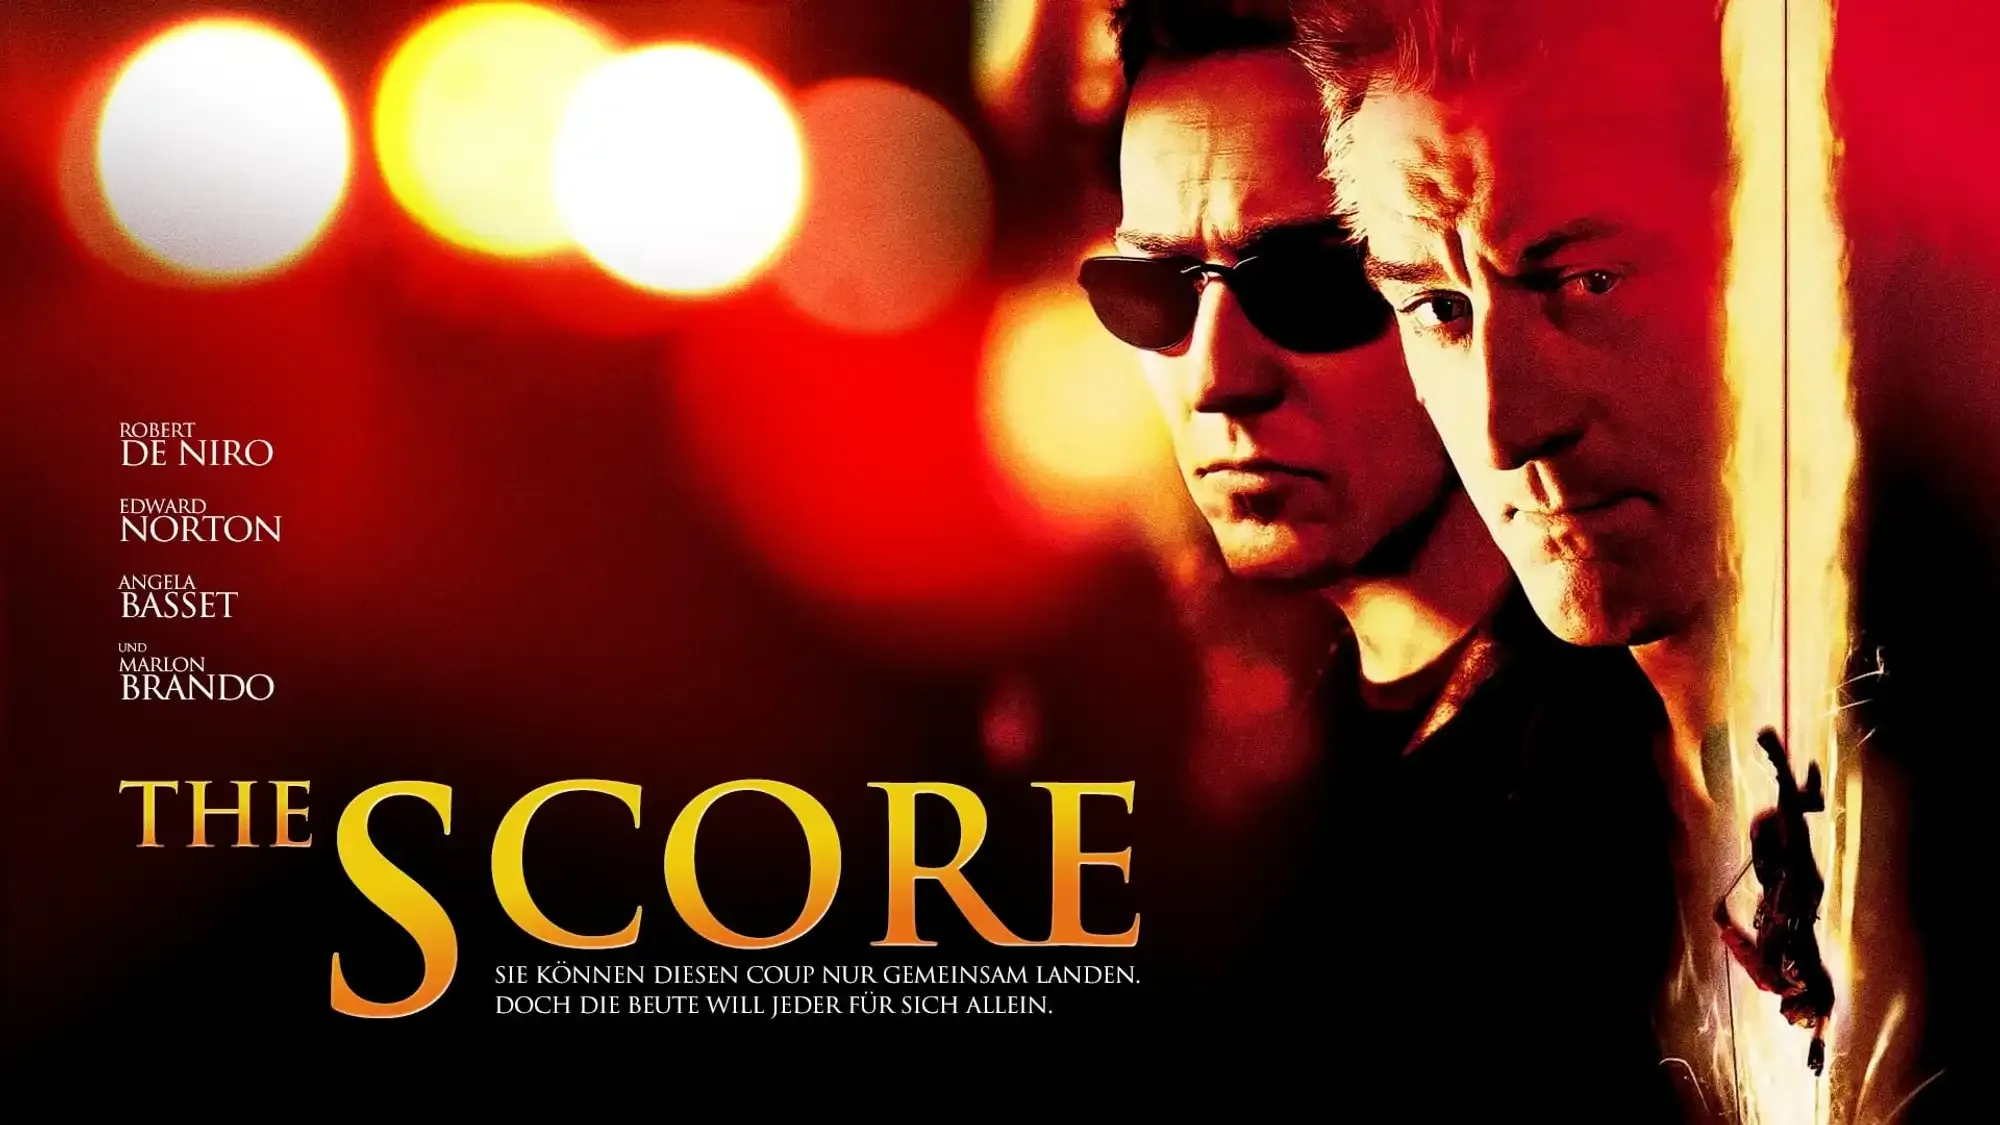 The Score movie review